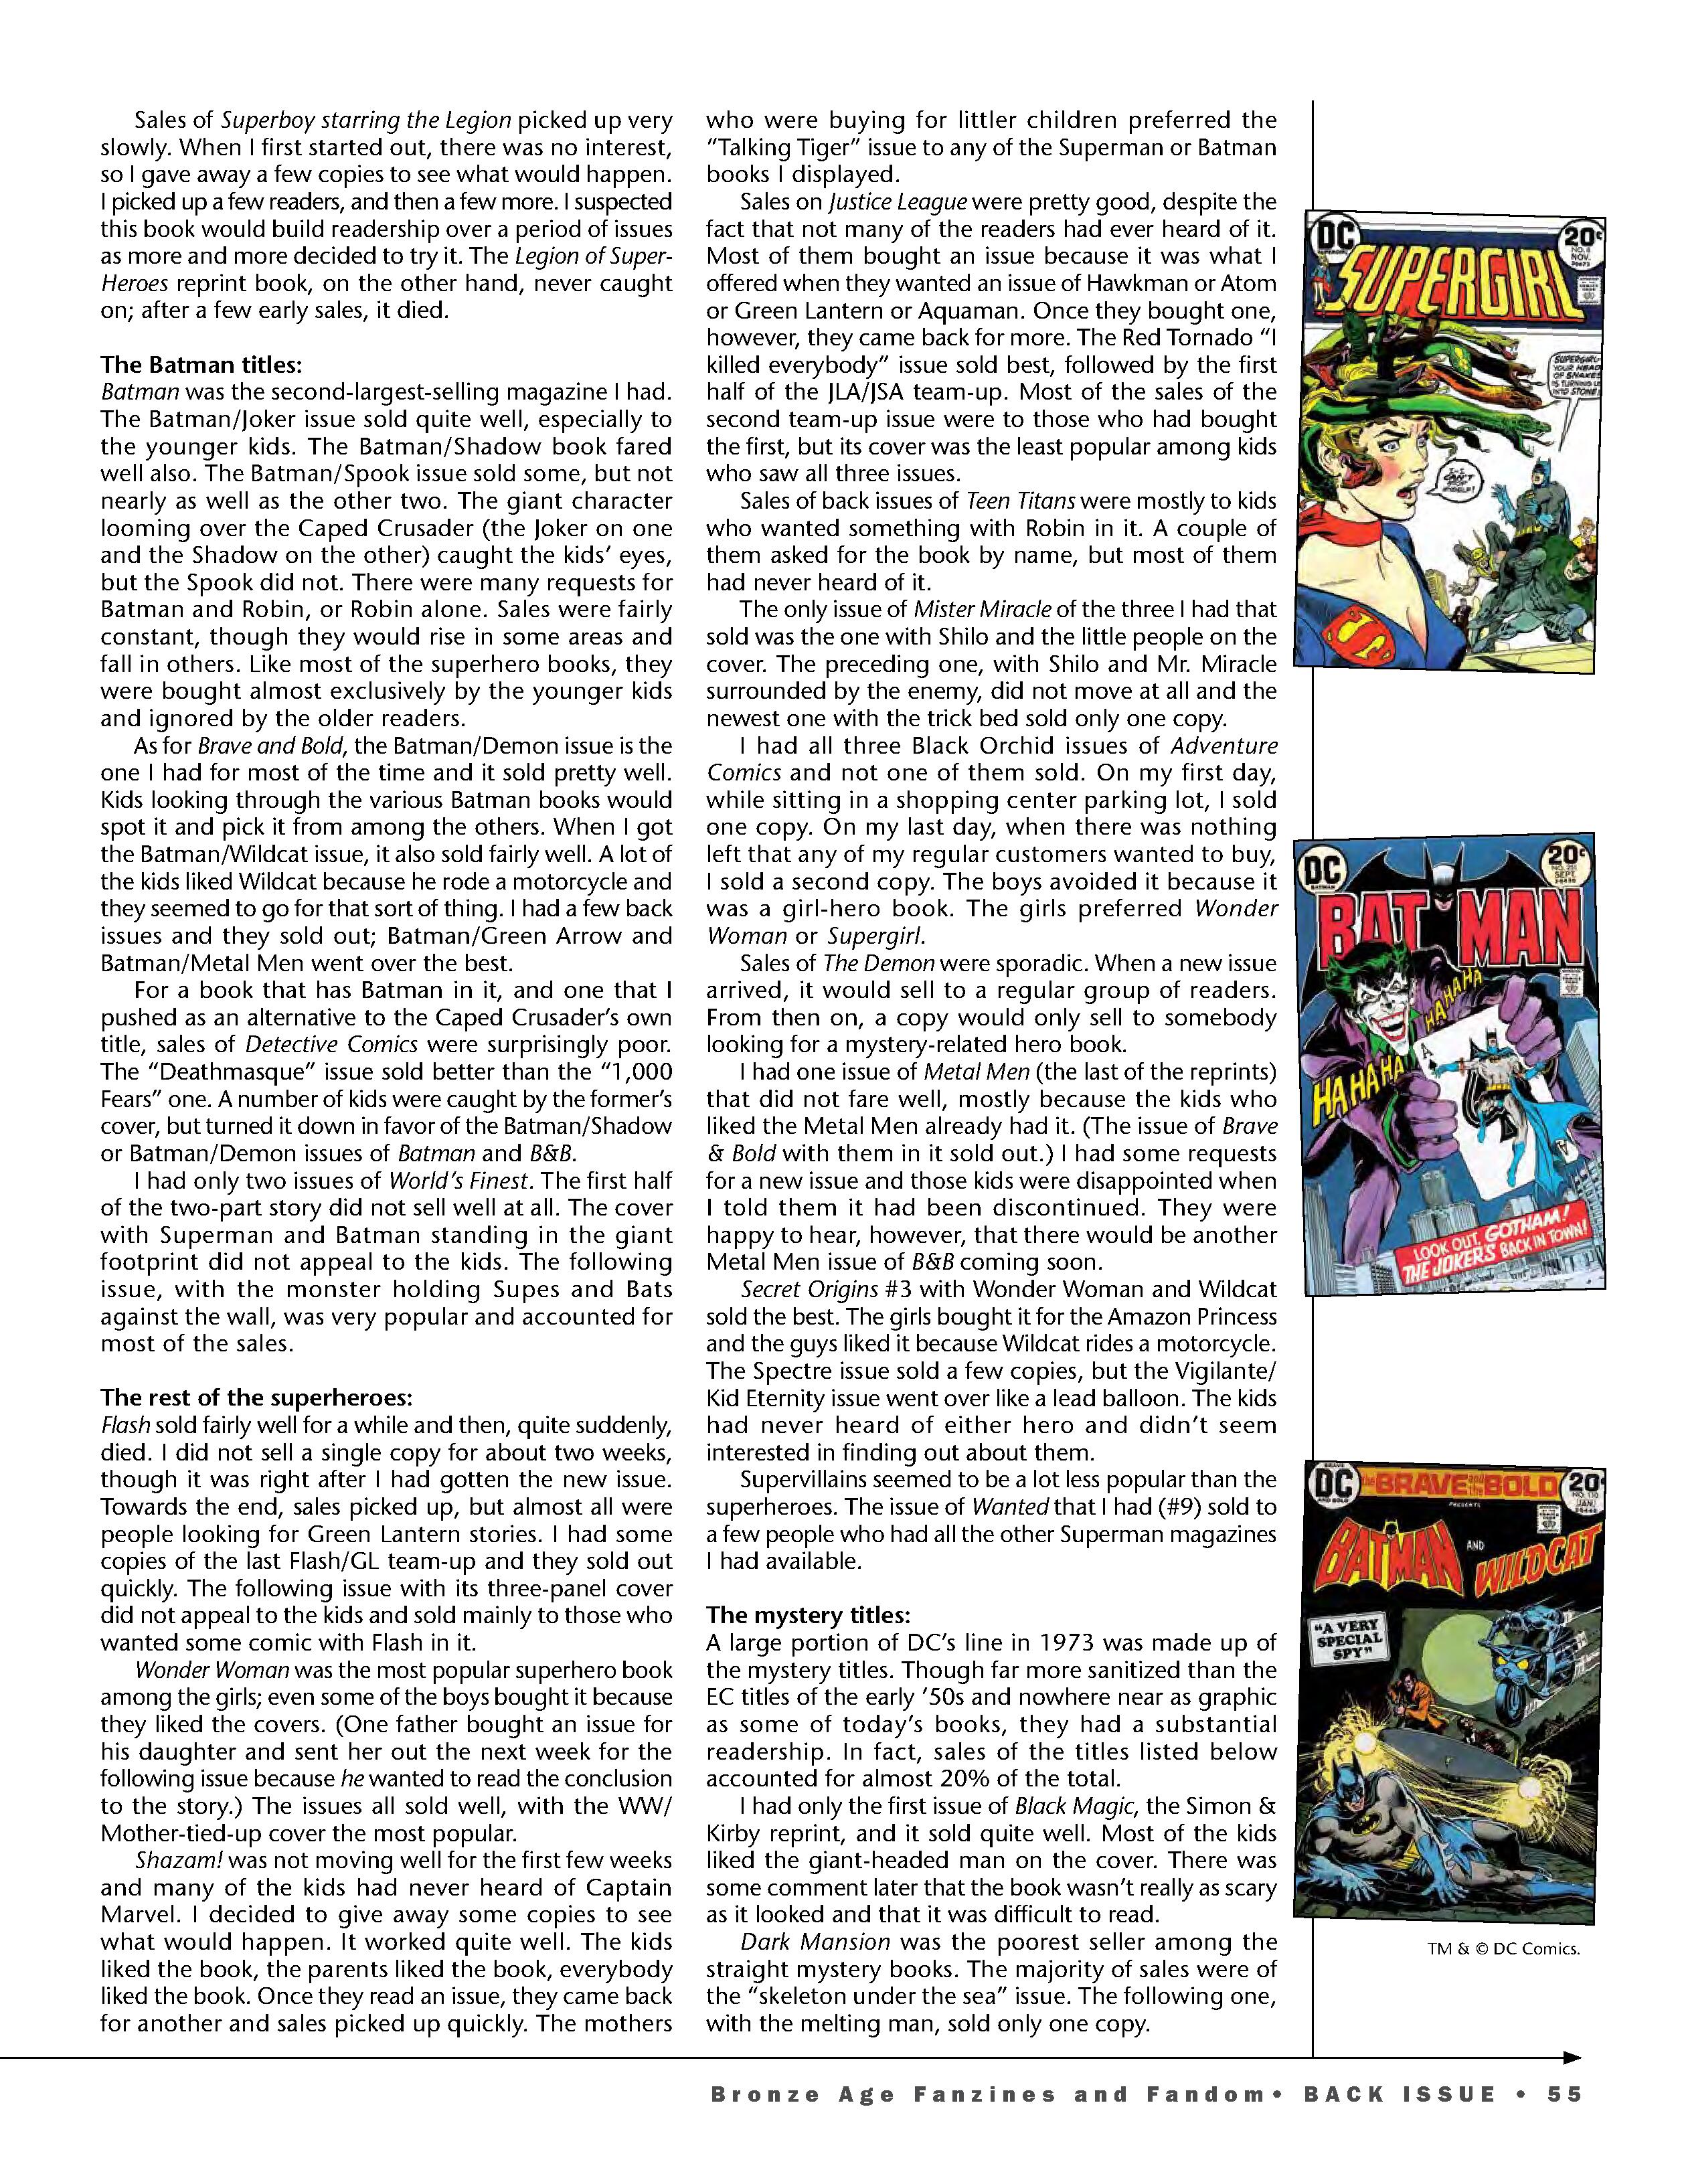 Read online Back Issue comic -  Issue #100 - 57